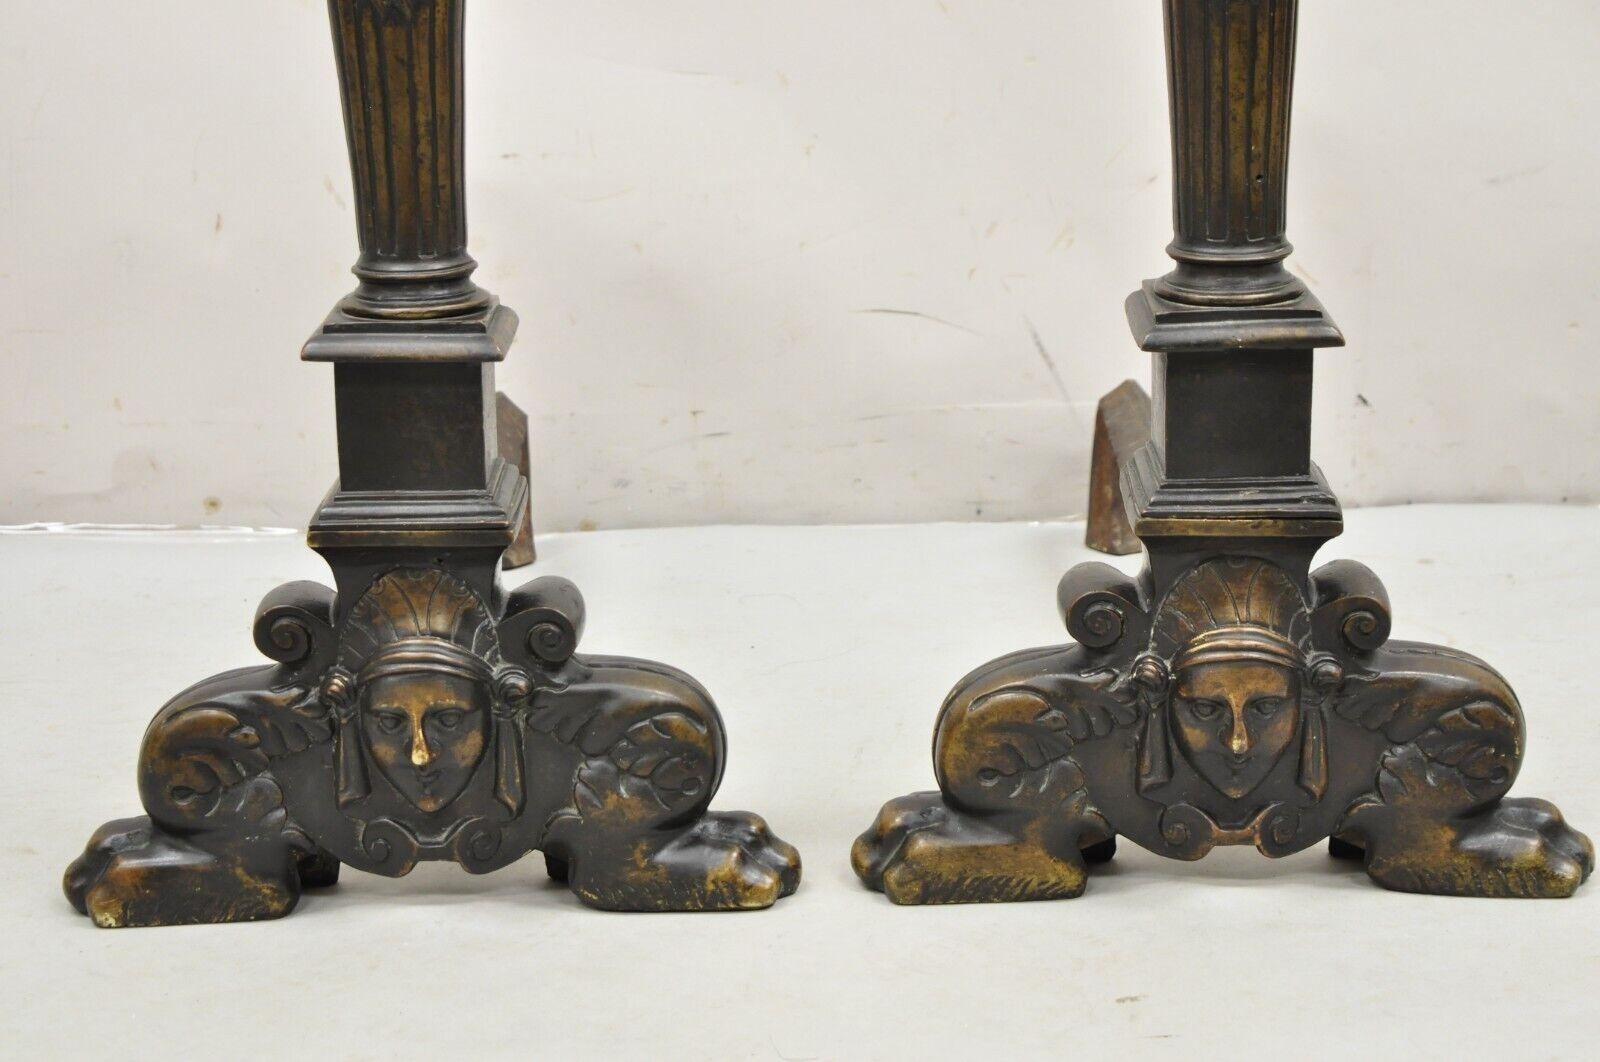 Antique French Renaissance Revival Large Figural Man and Woman Andirons - a Pair For Sale 2